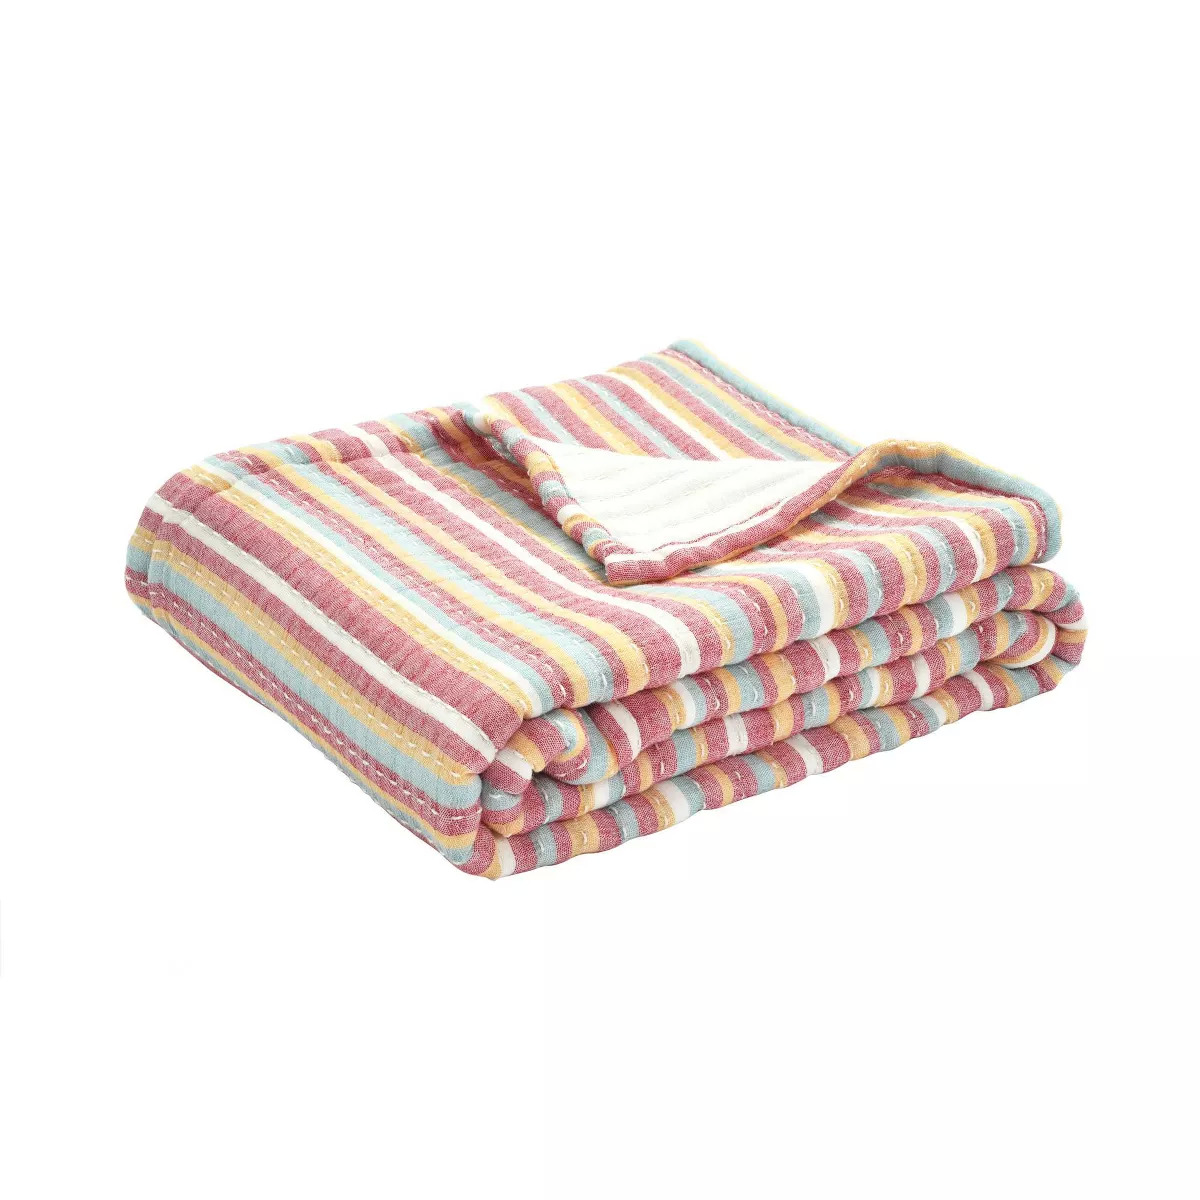 50" x 60" Lush Decor Throw Blankets (Various) from $6.90 at Target w/ Free Ship on $35+